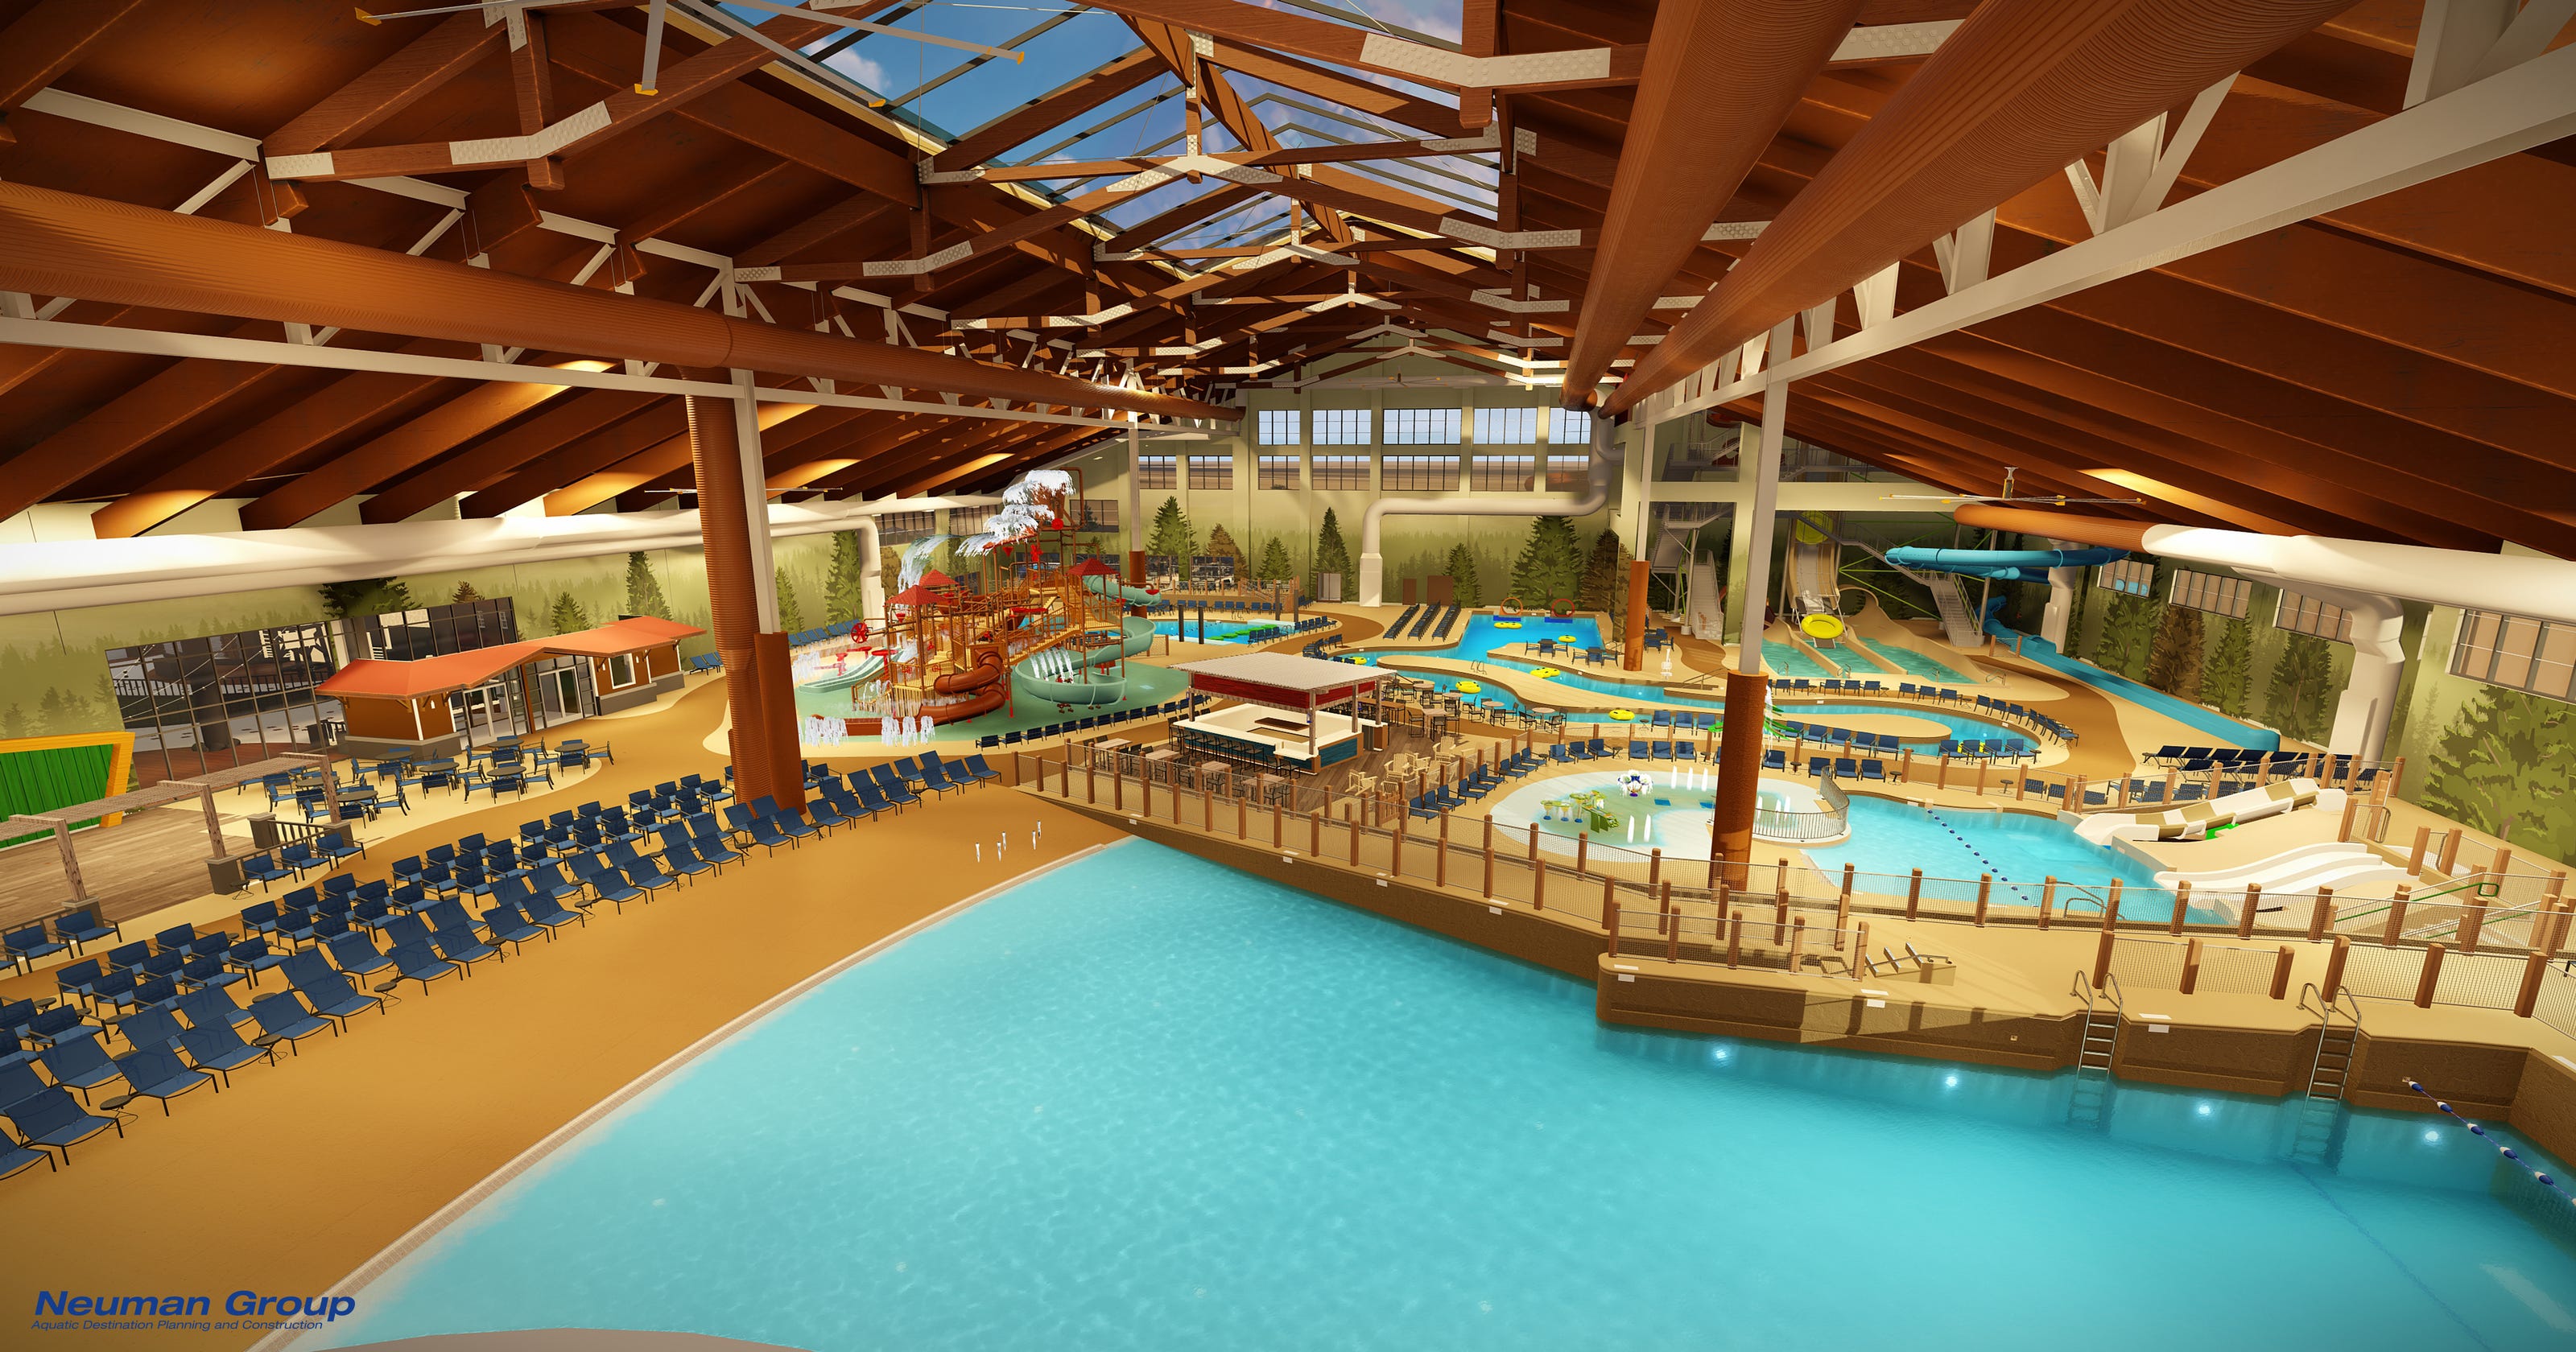 Great Wolf Lodge Water Park Map